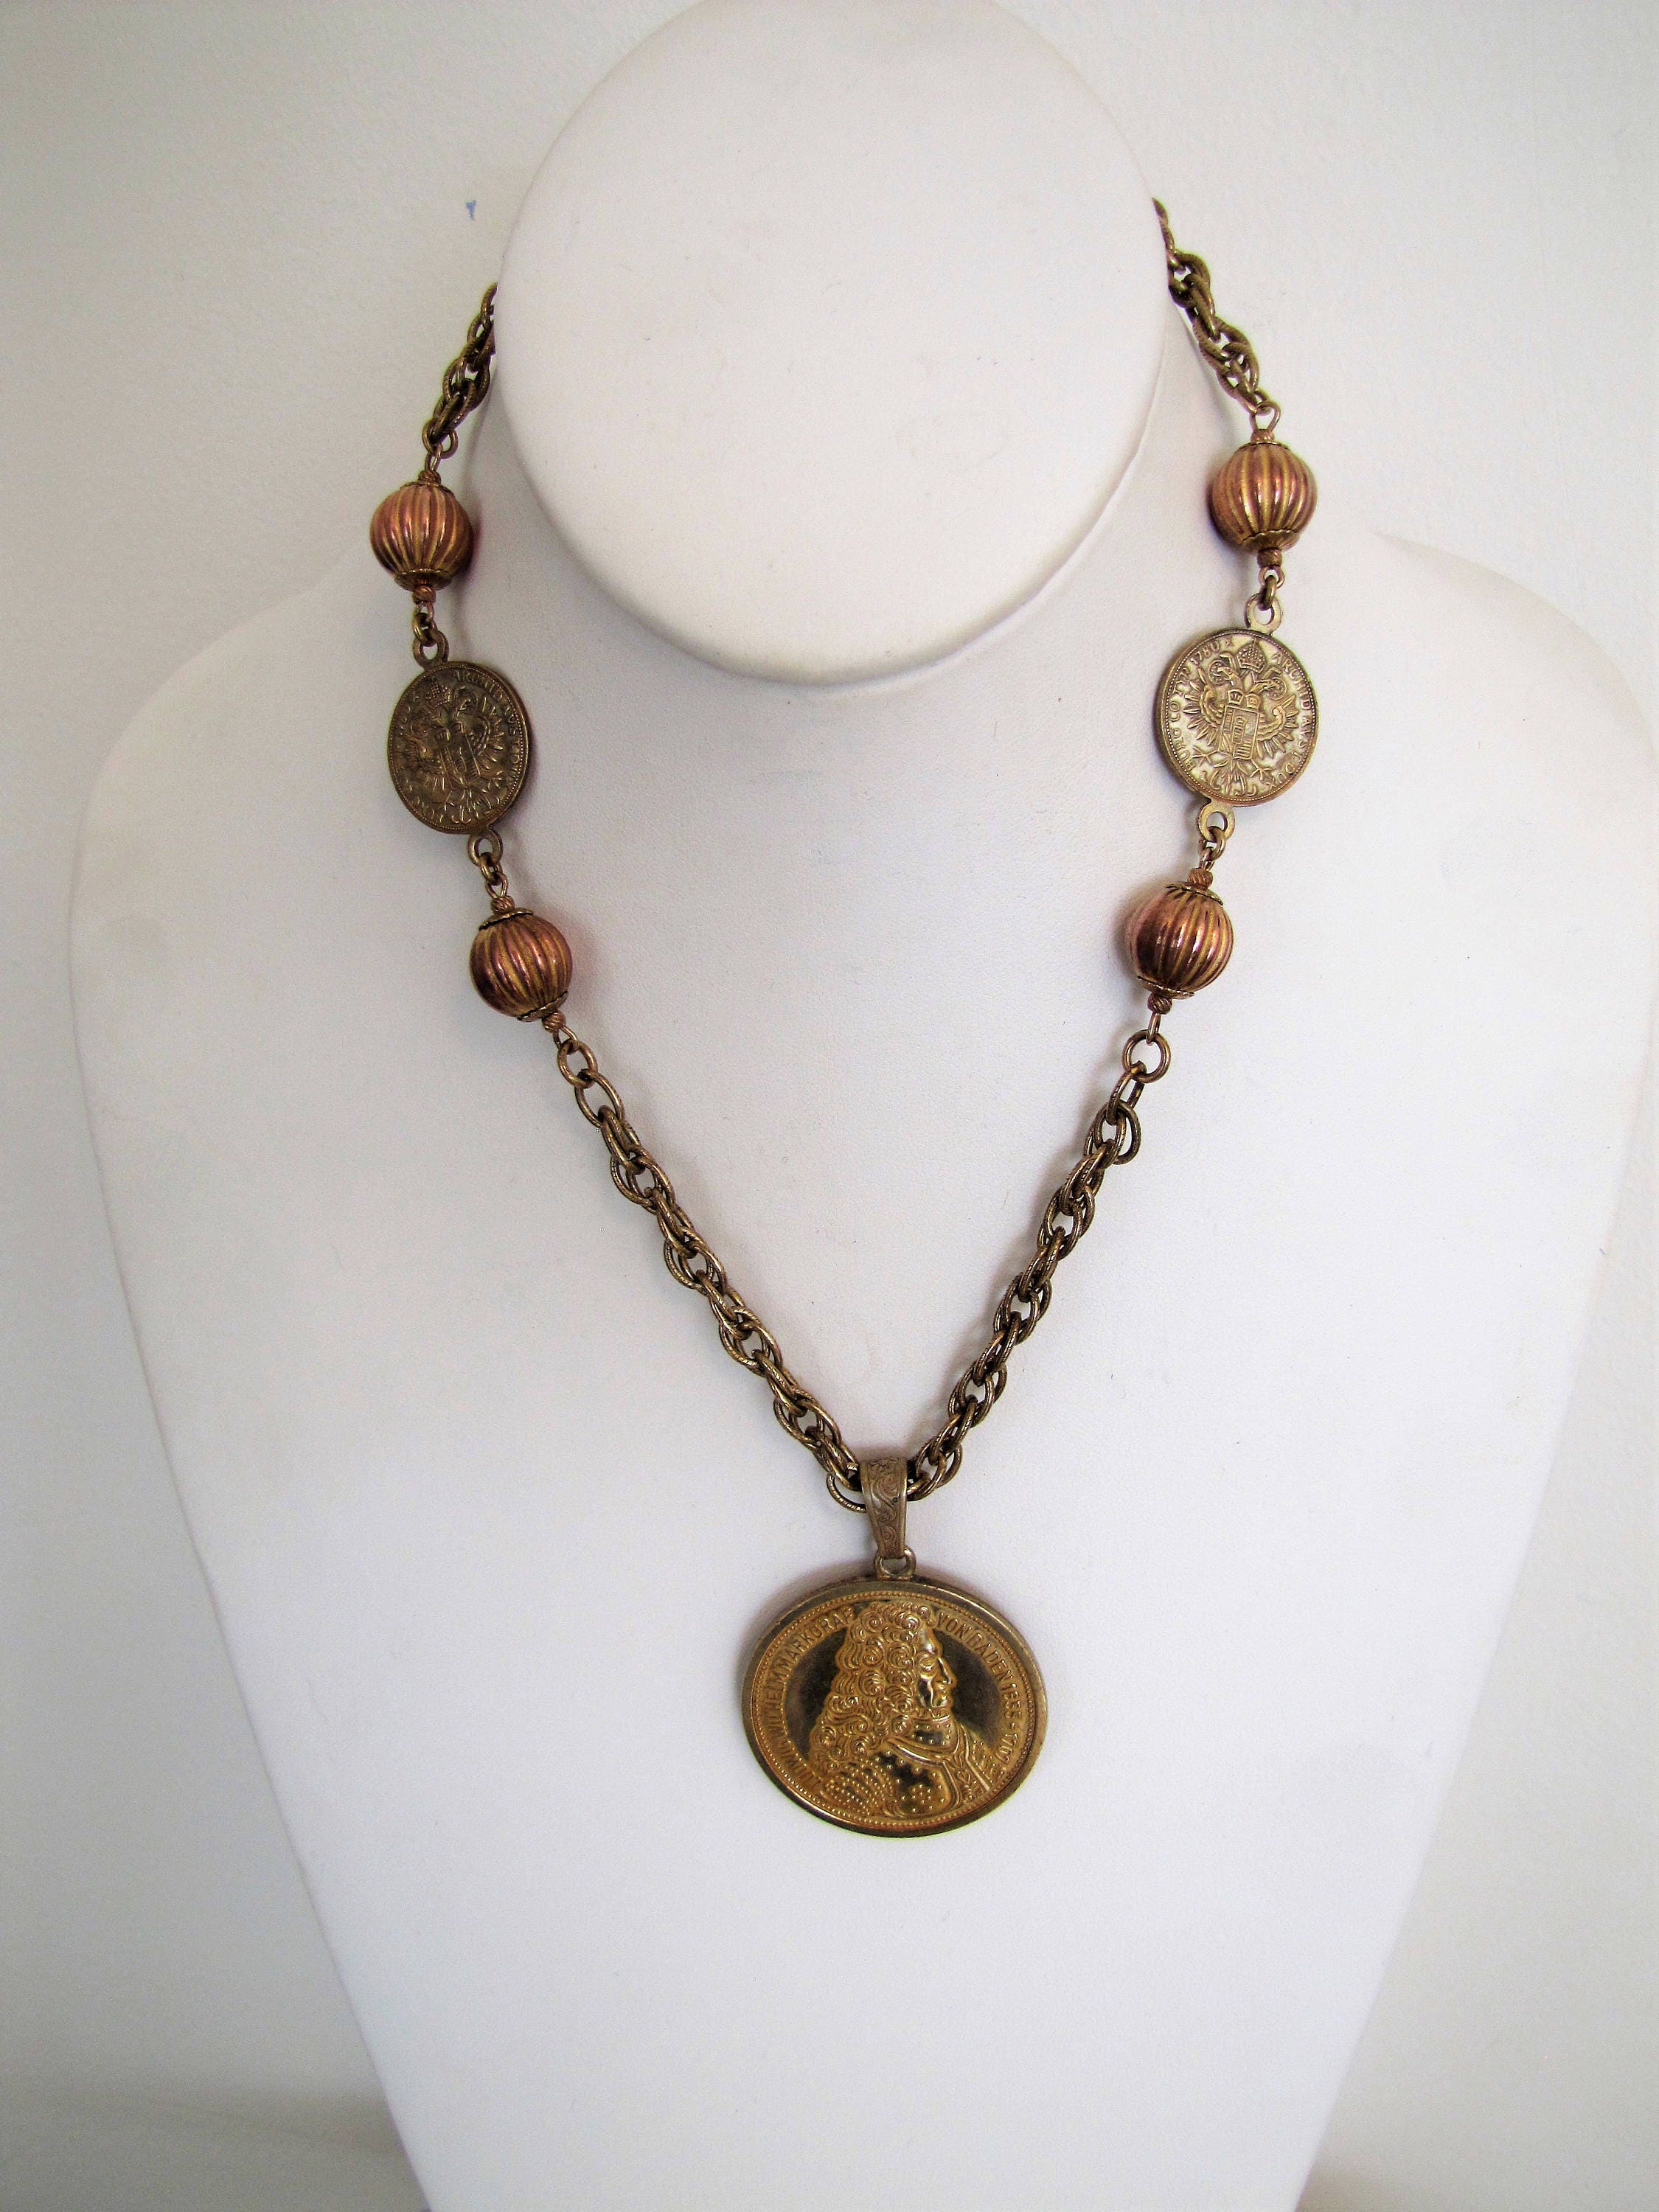 Vintage 1960s Miriam Haskell Charm Coin Medallion Necklace.